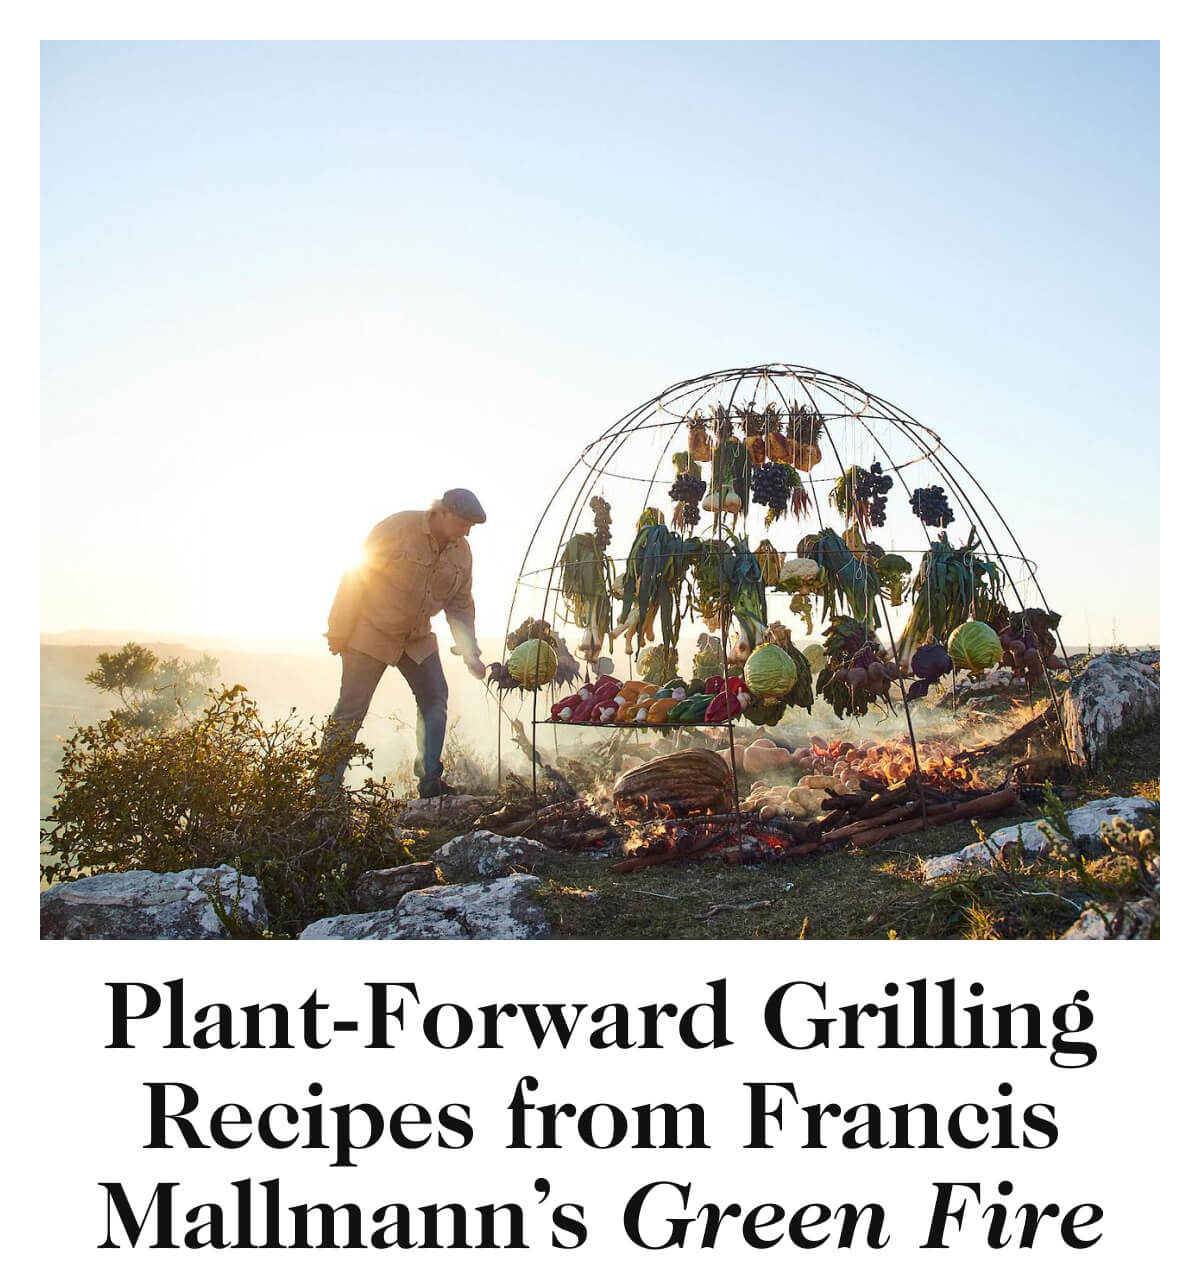 Plant-Forward Grilling Recipes from Francis Mallmann’s Green Fire